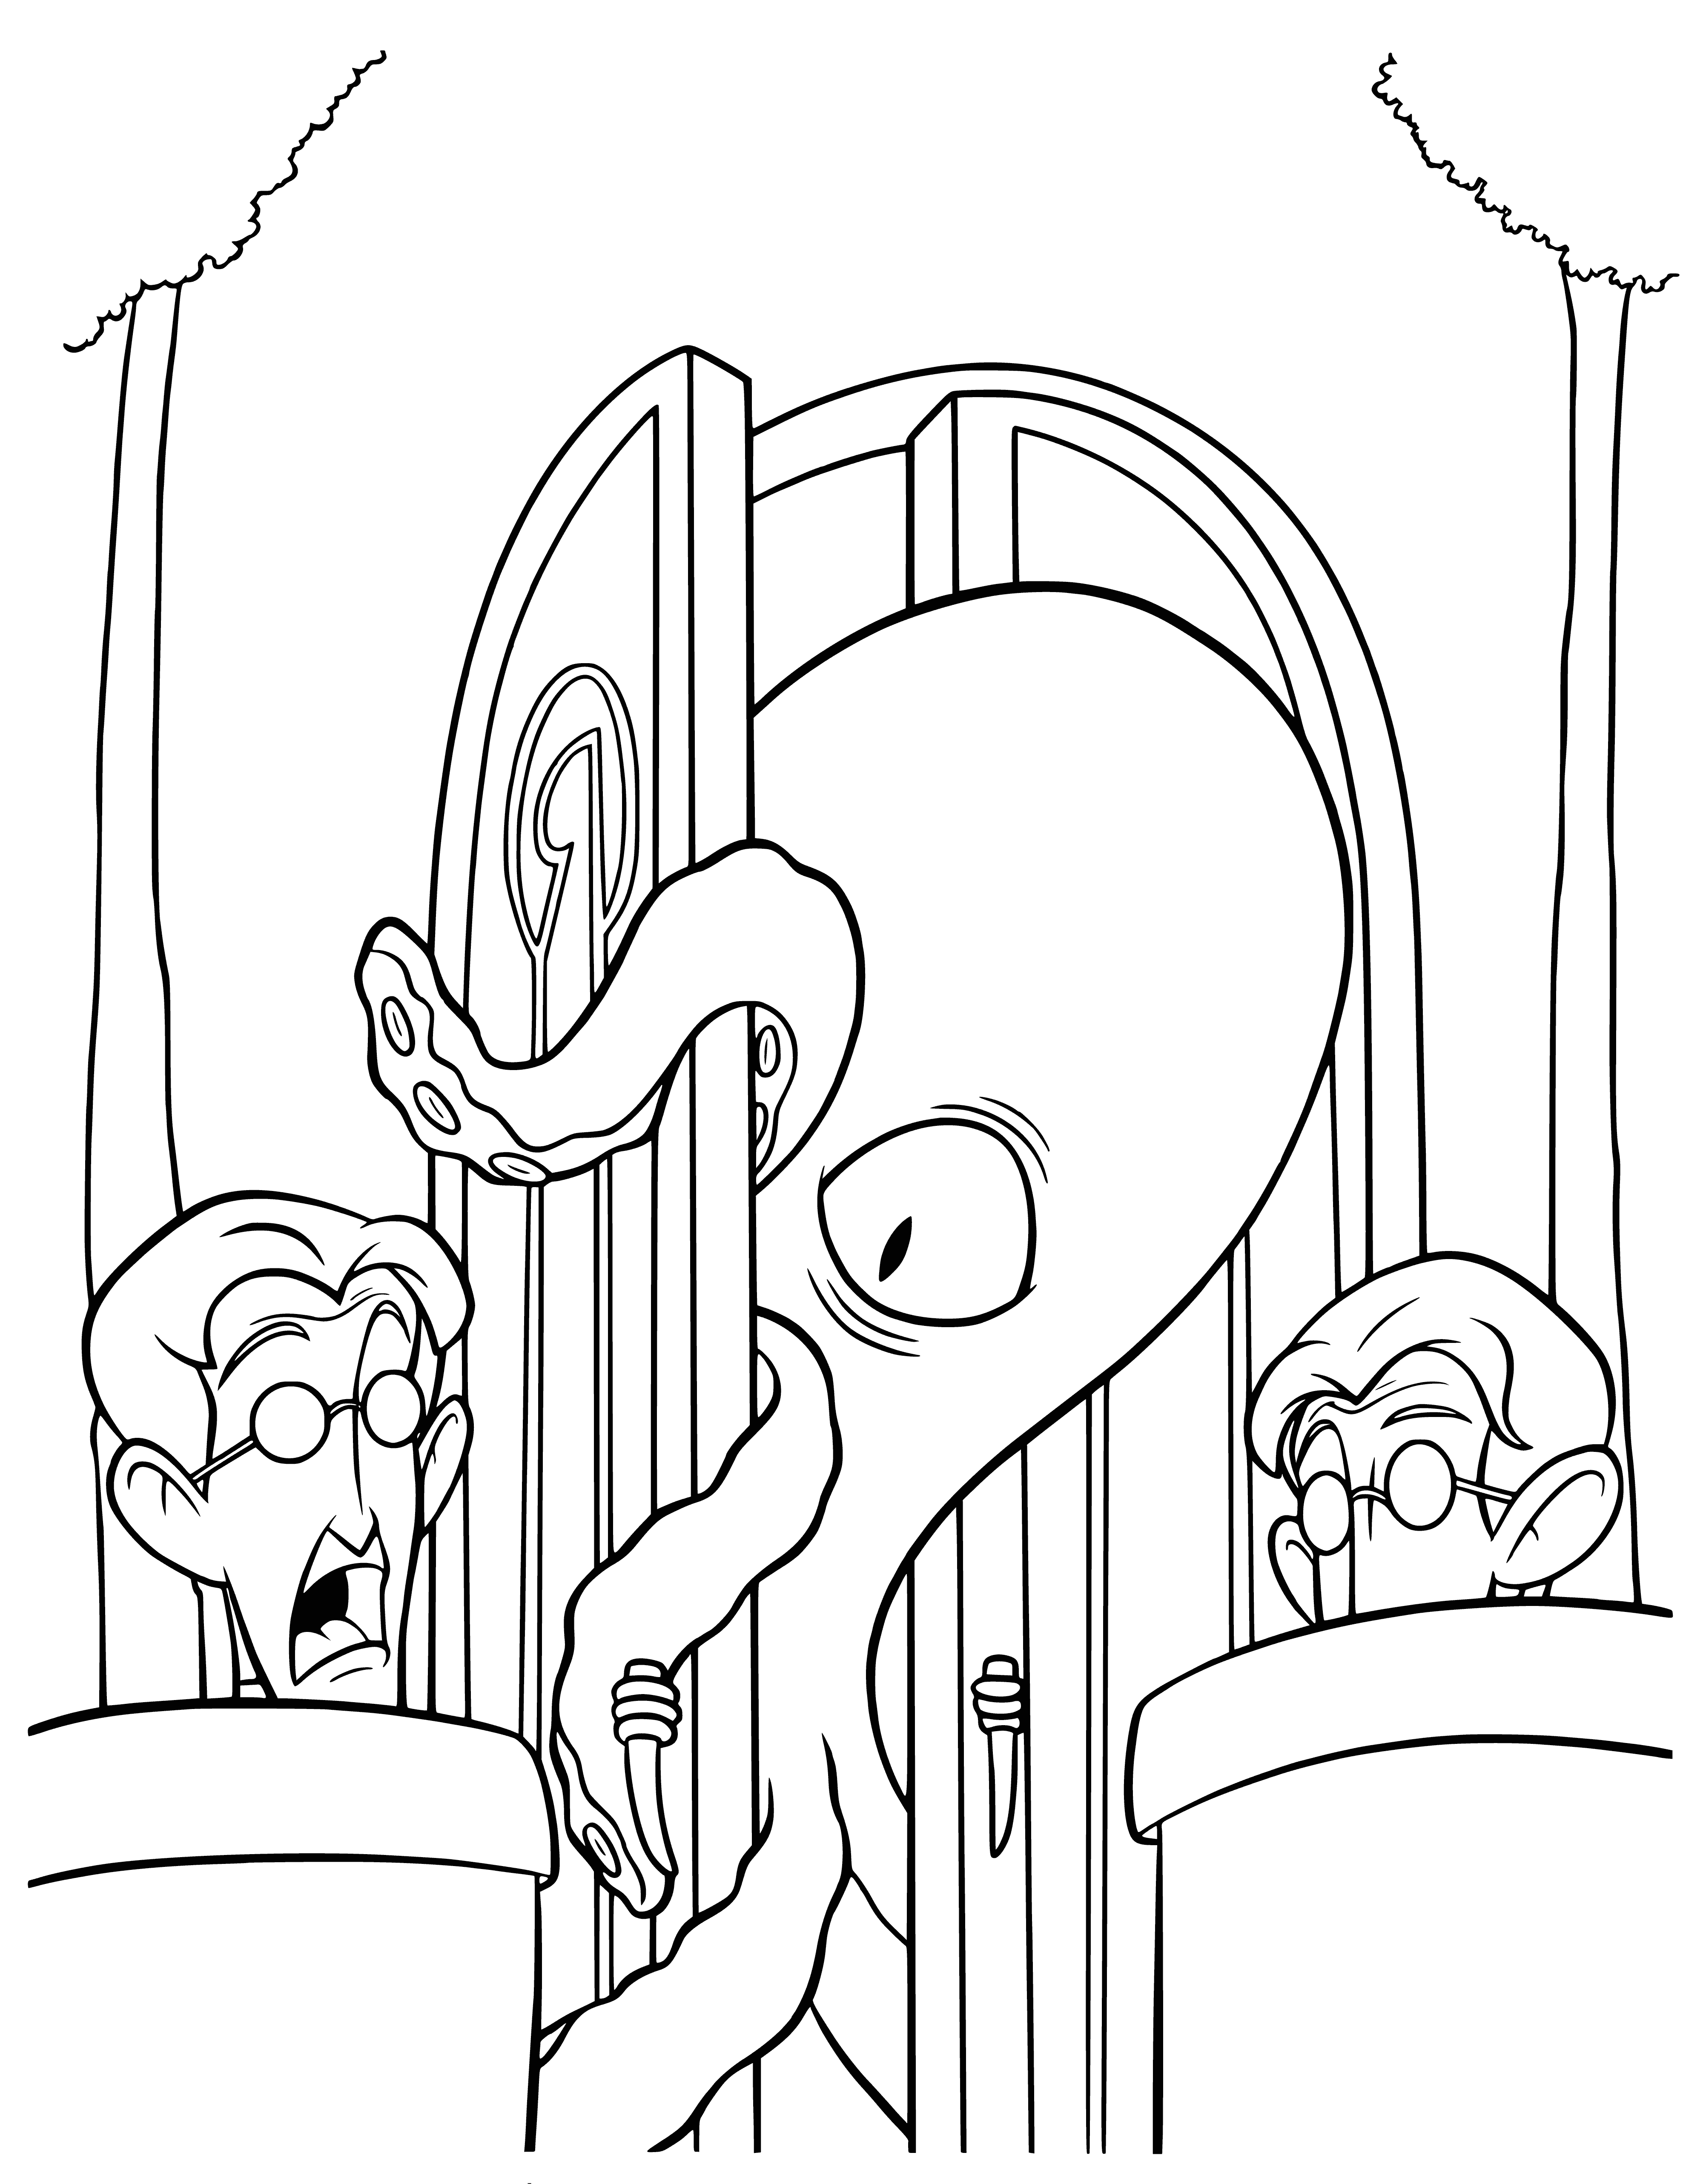 Octopus? coloring page